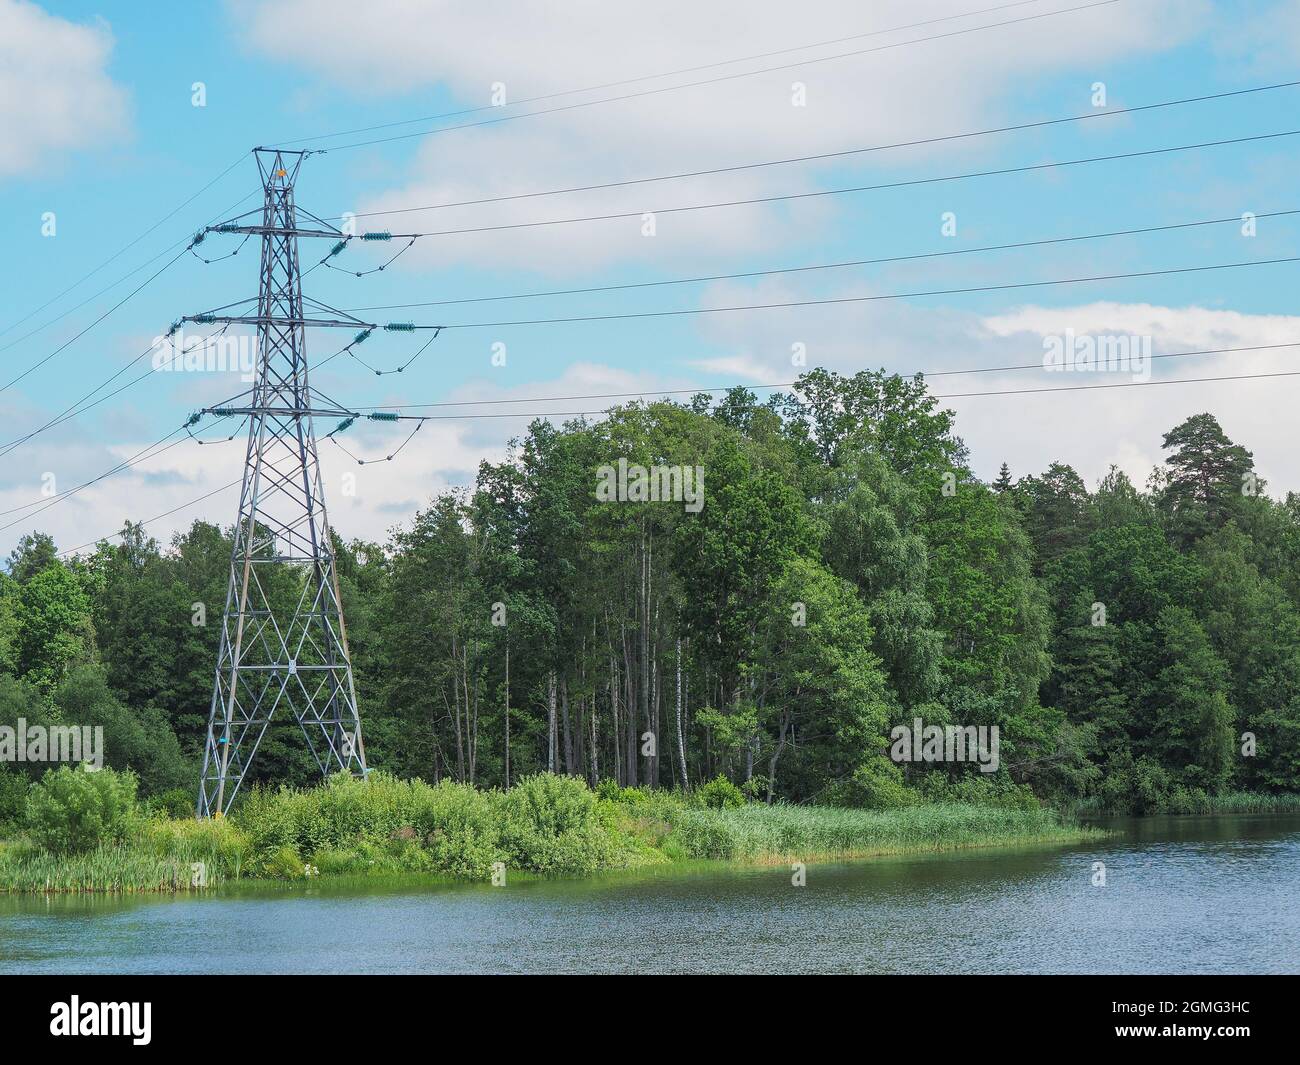 High voltage power lines pylons and electrical cables on a clear blue sky Stock Photo